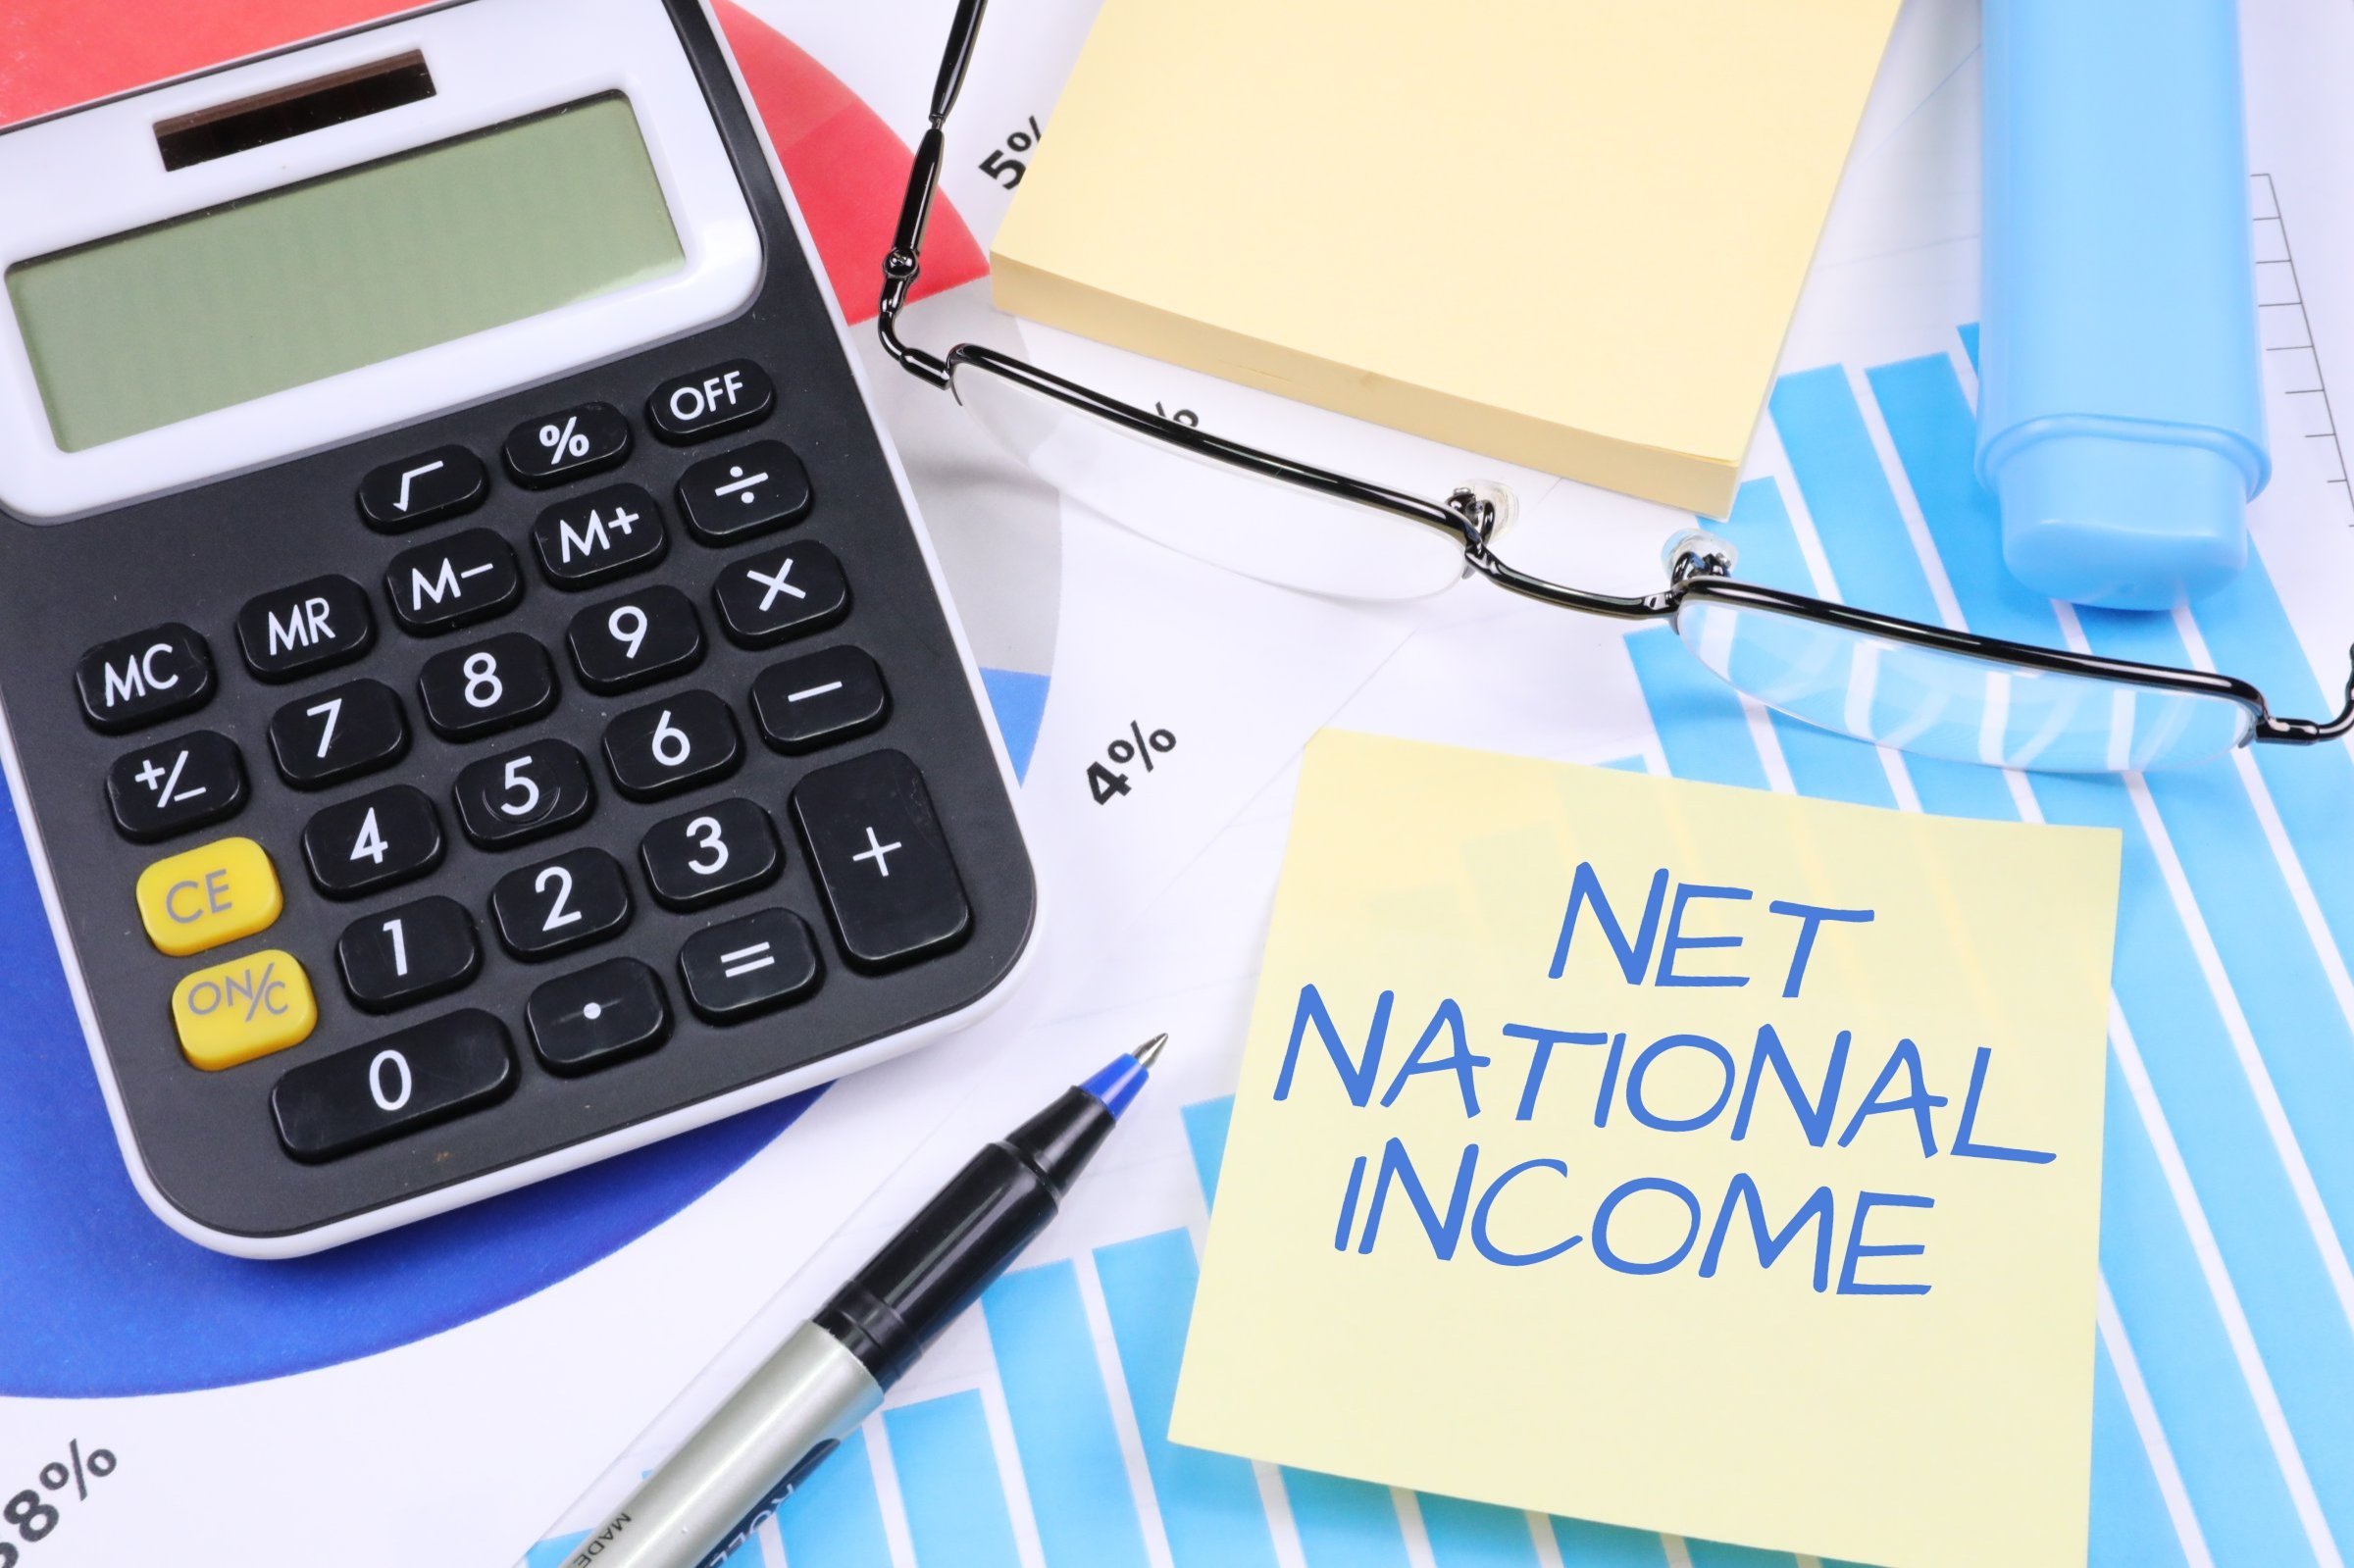 Net National Income